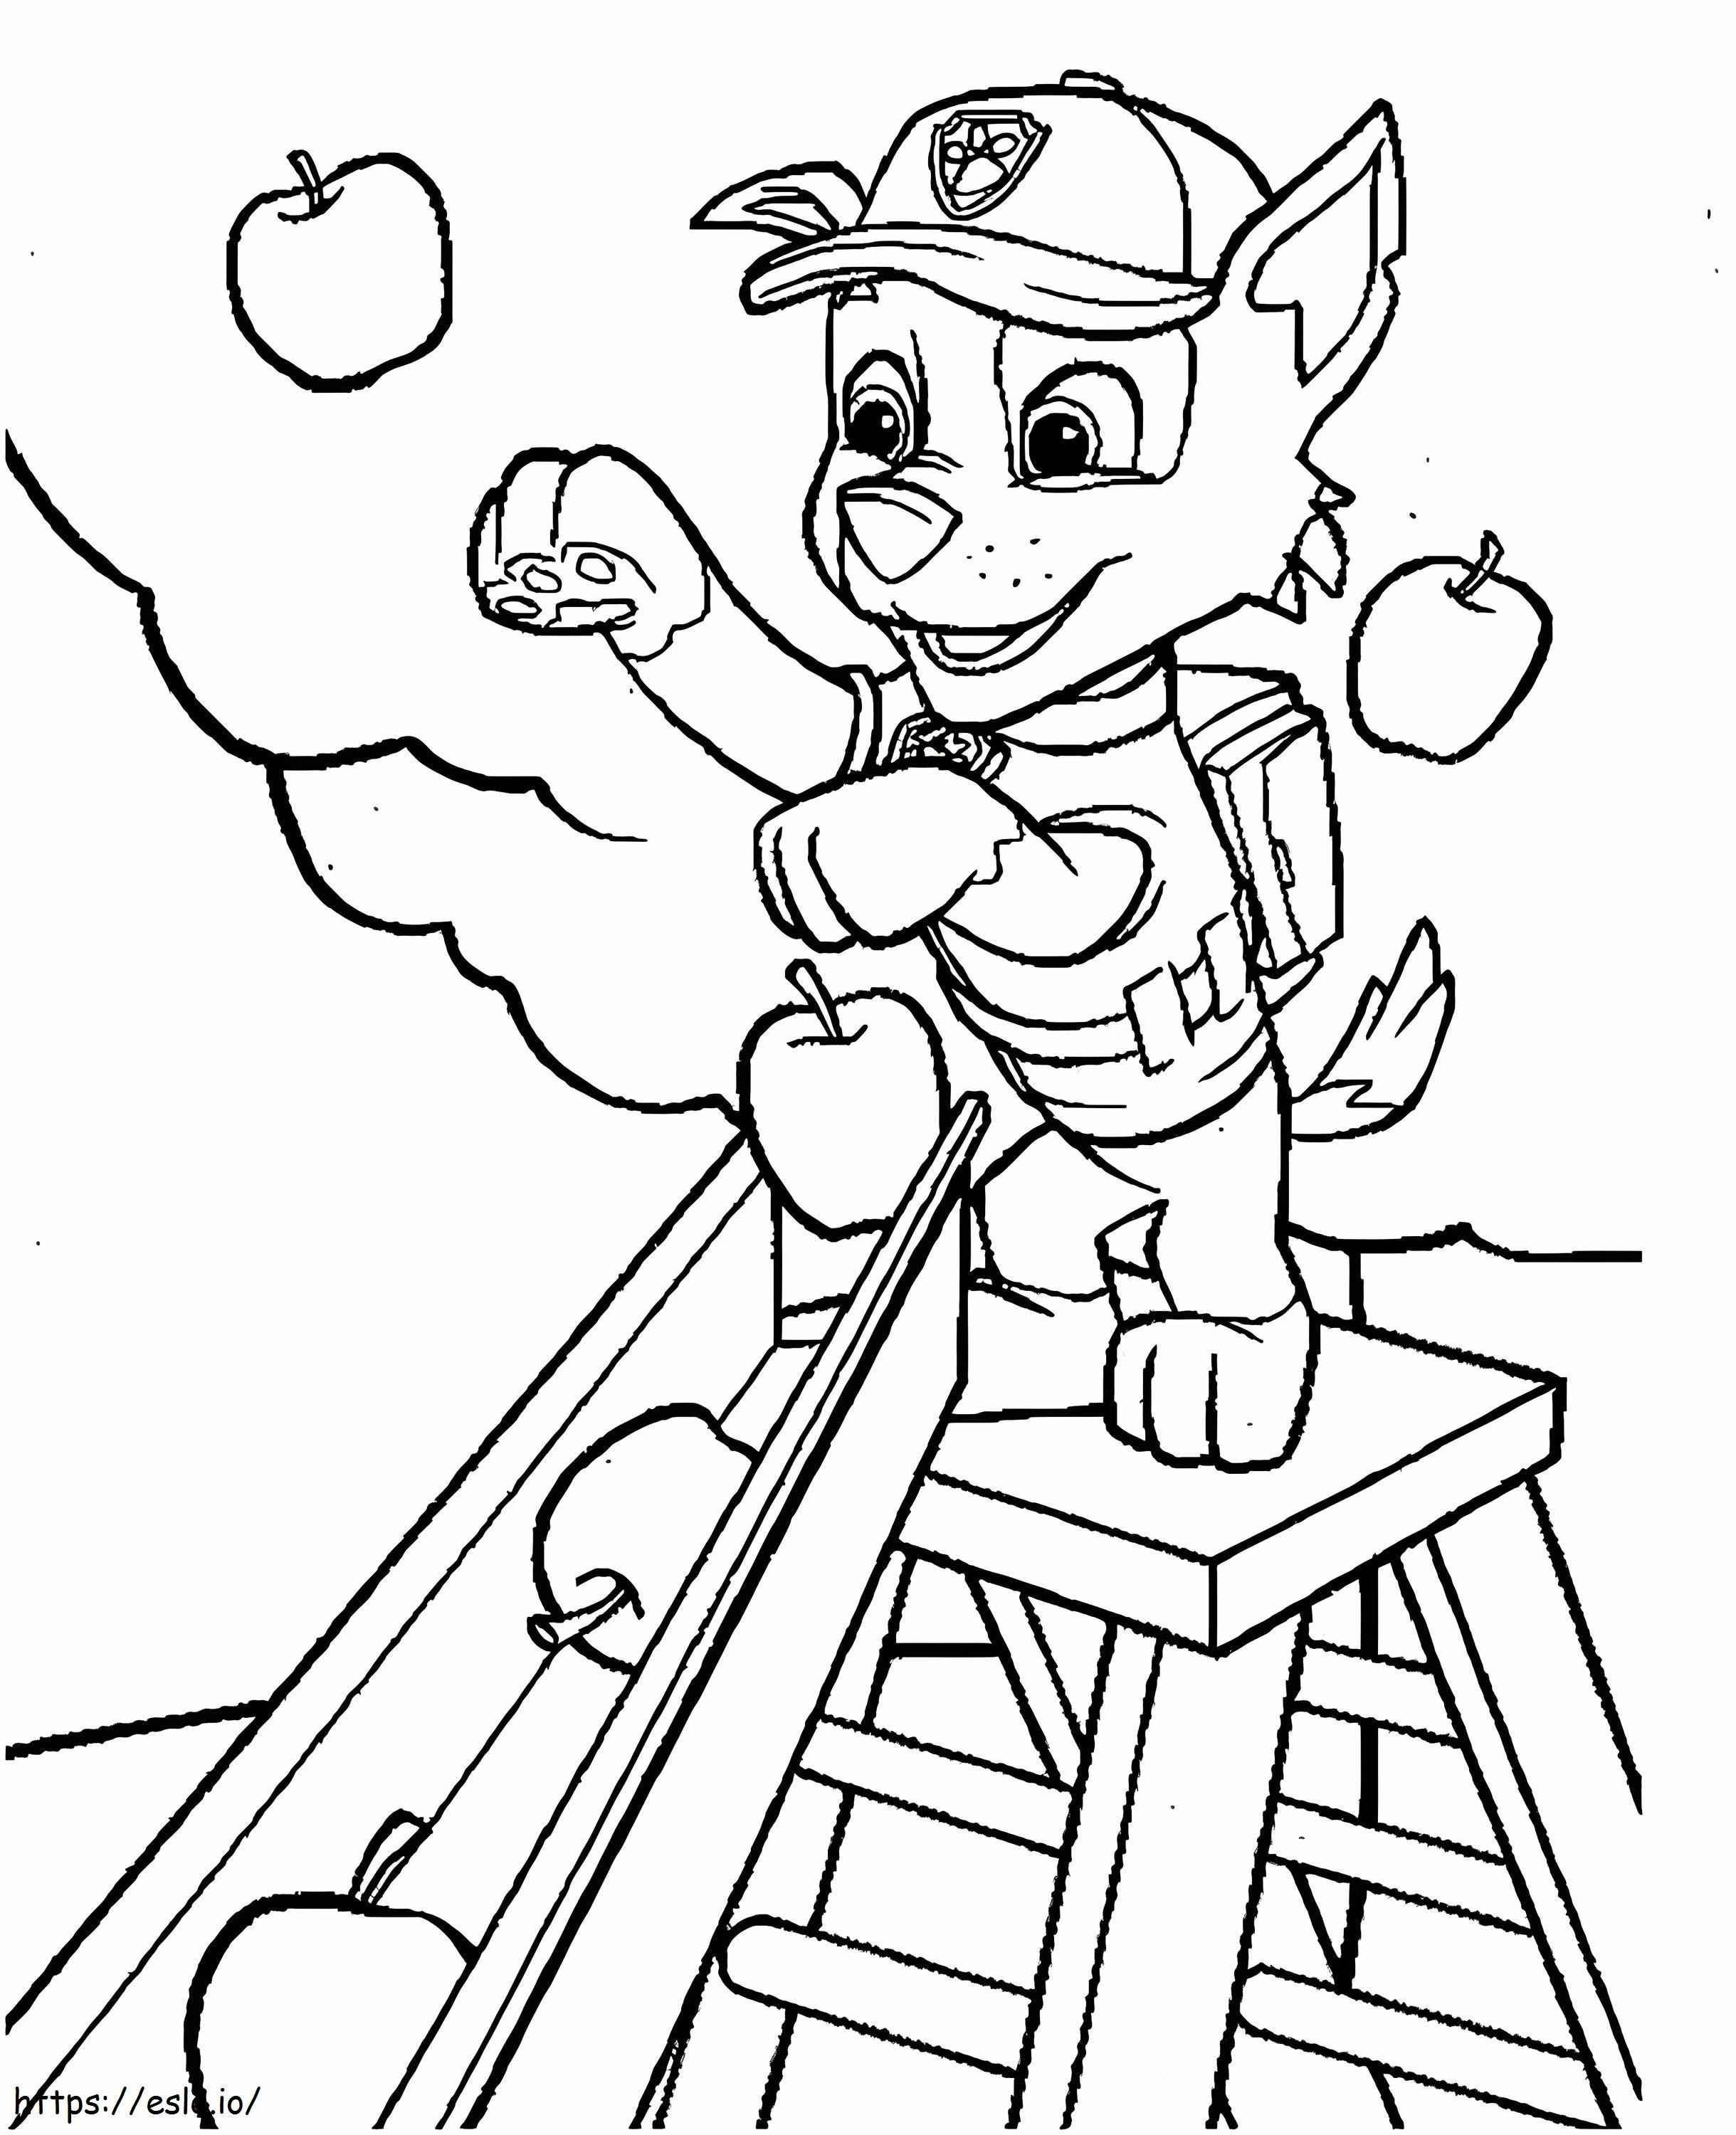 Rocky Picking Apples coloring page